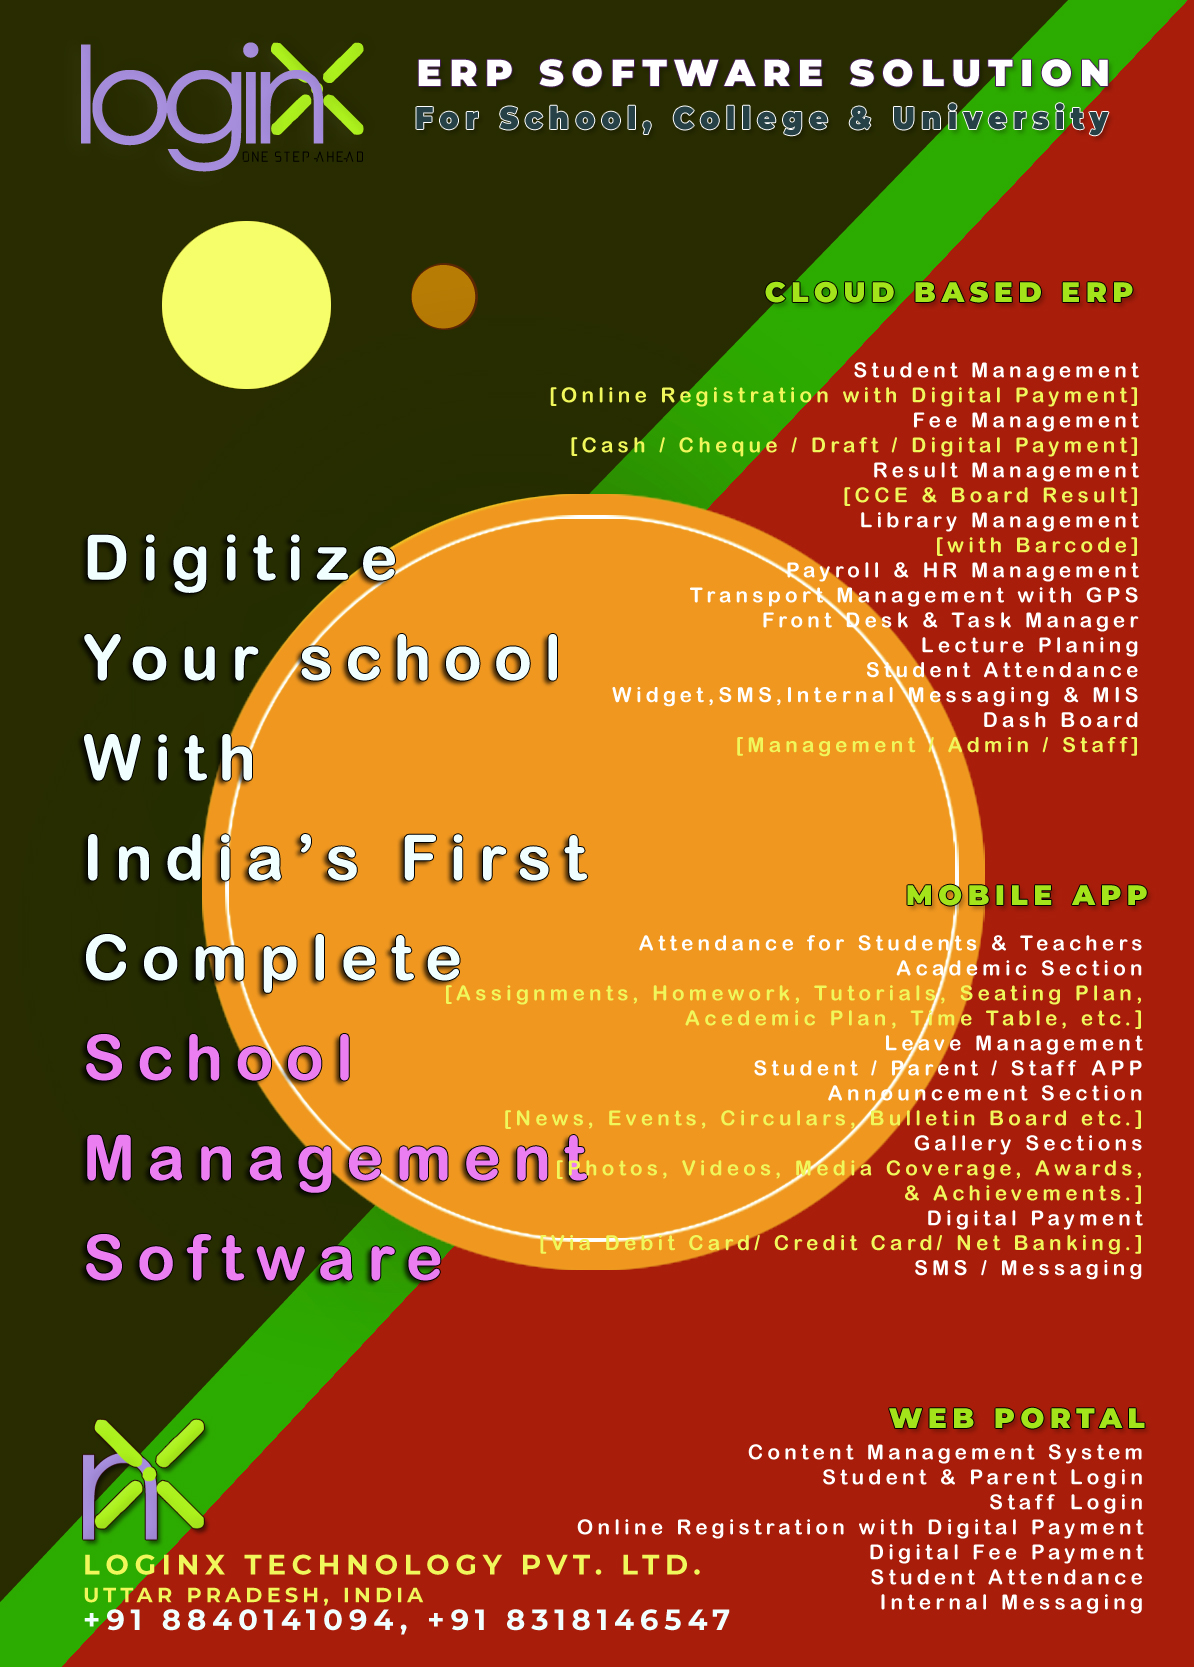 Why should schools use 
school management software?